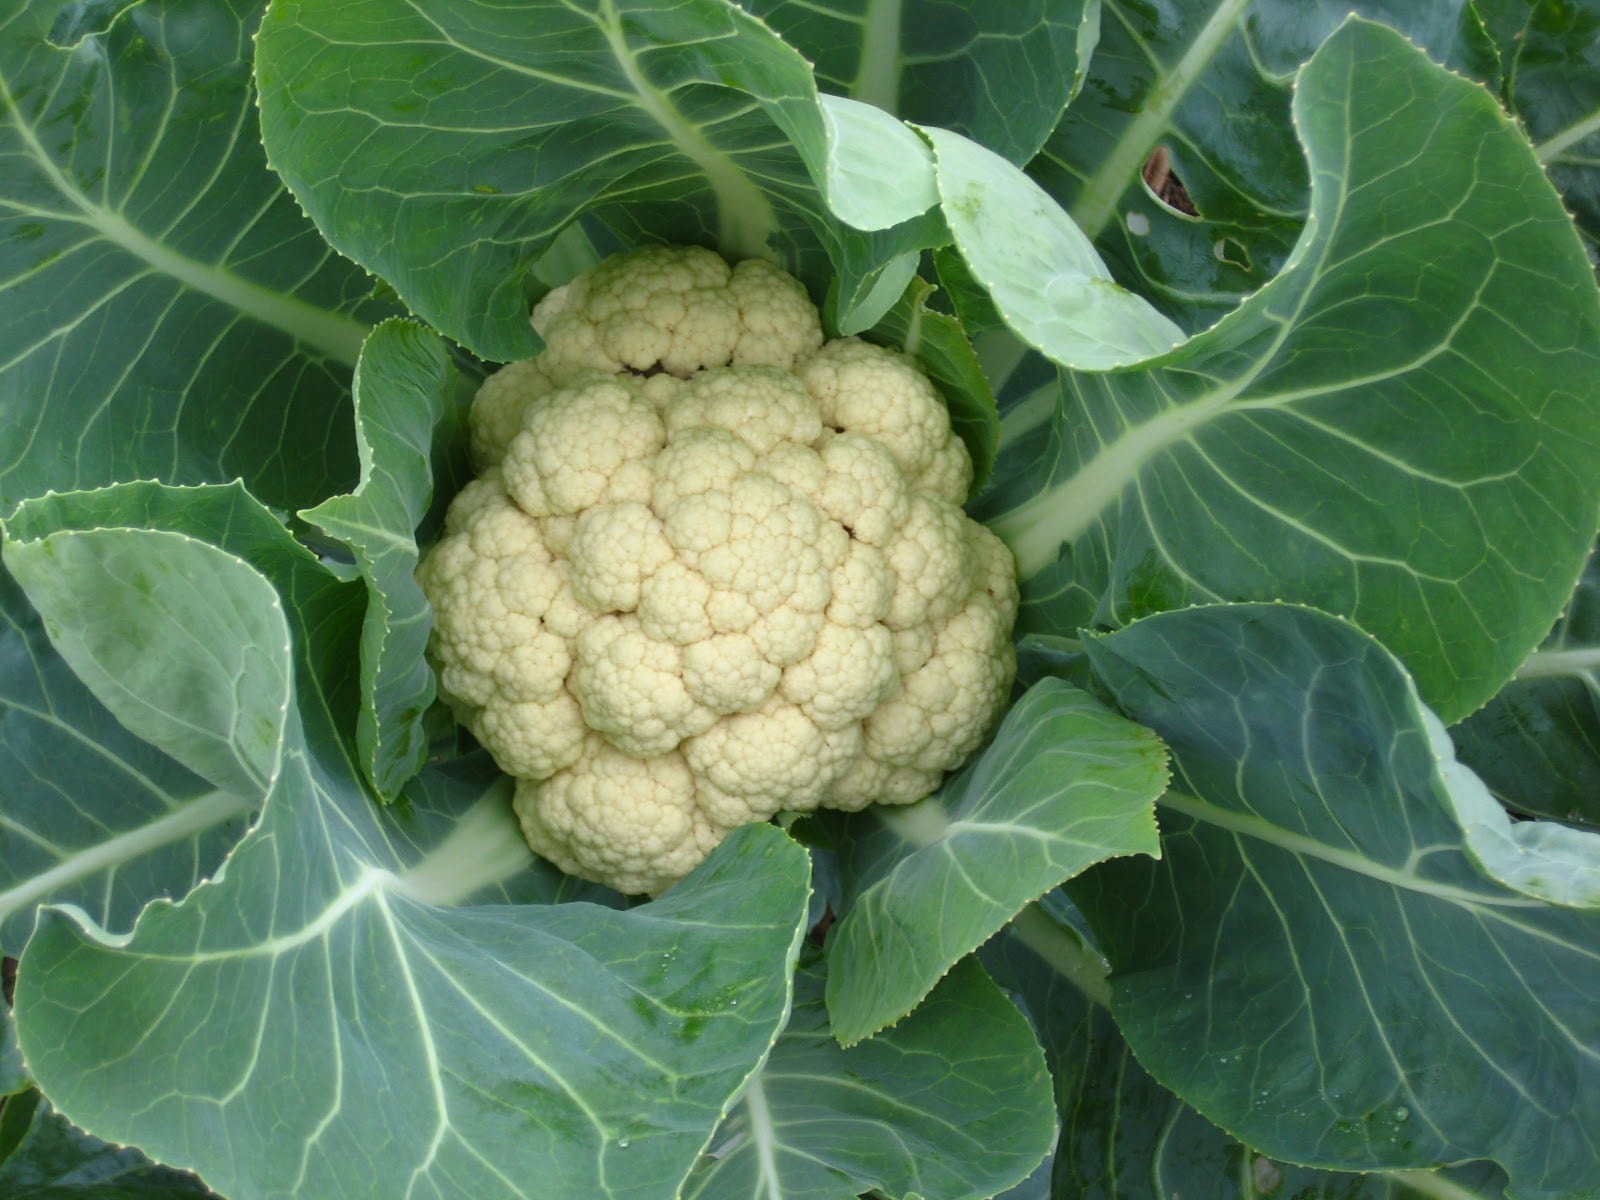 Picture of afresh cauliflower nestling in green leaves